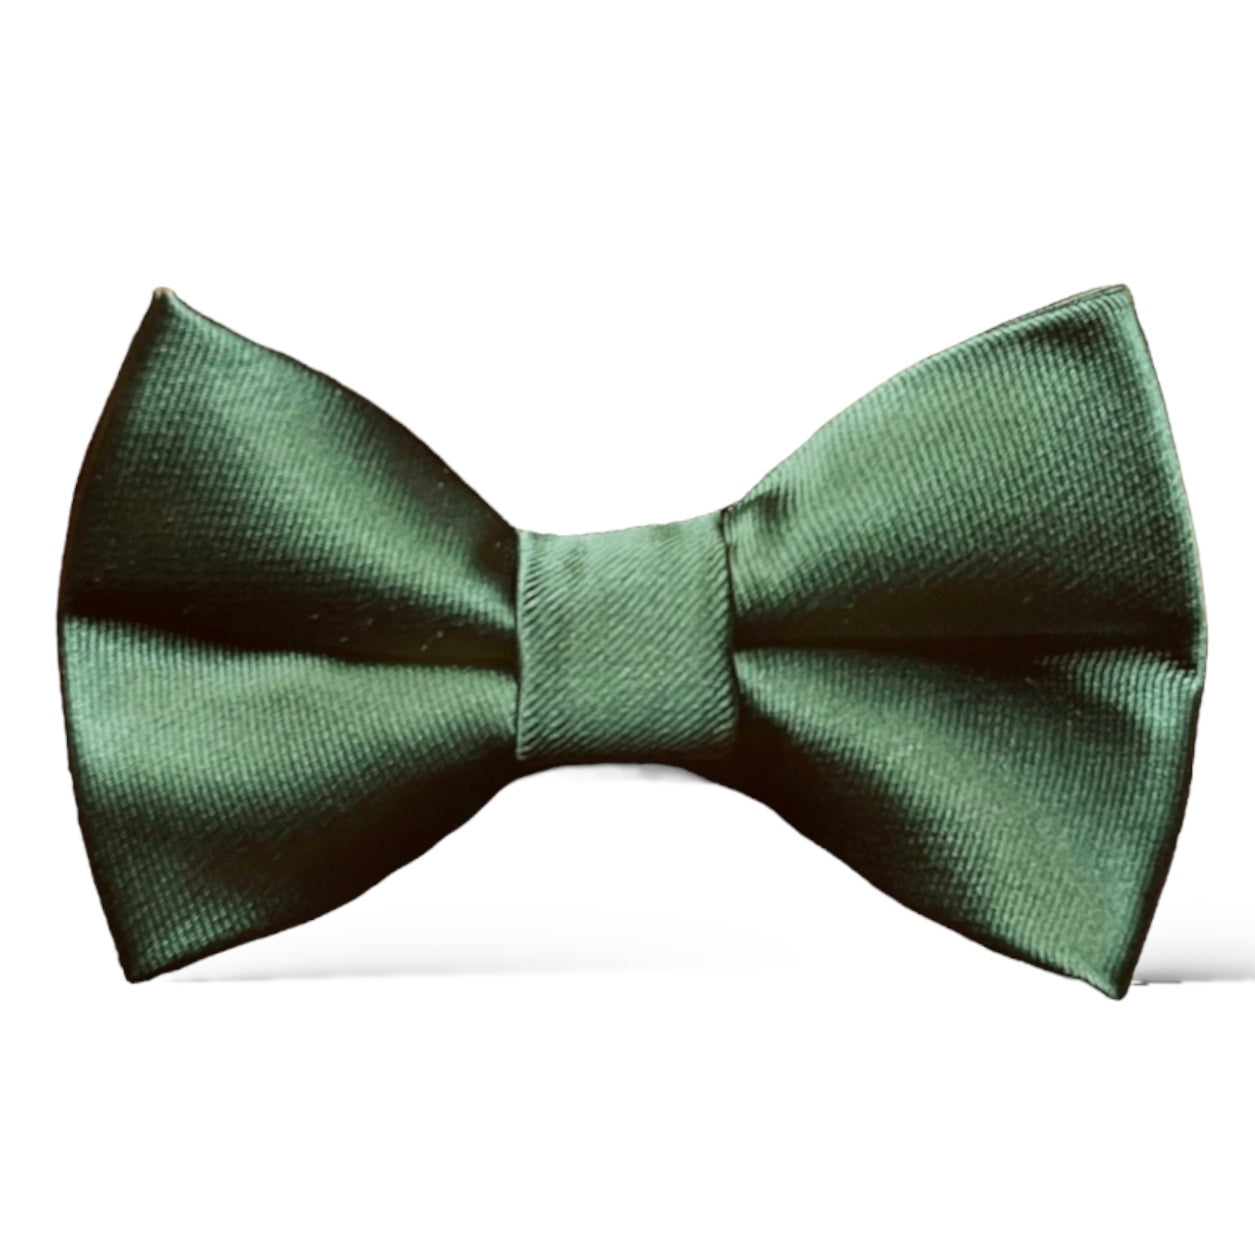 Satin Olive Green Bow Tie